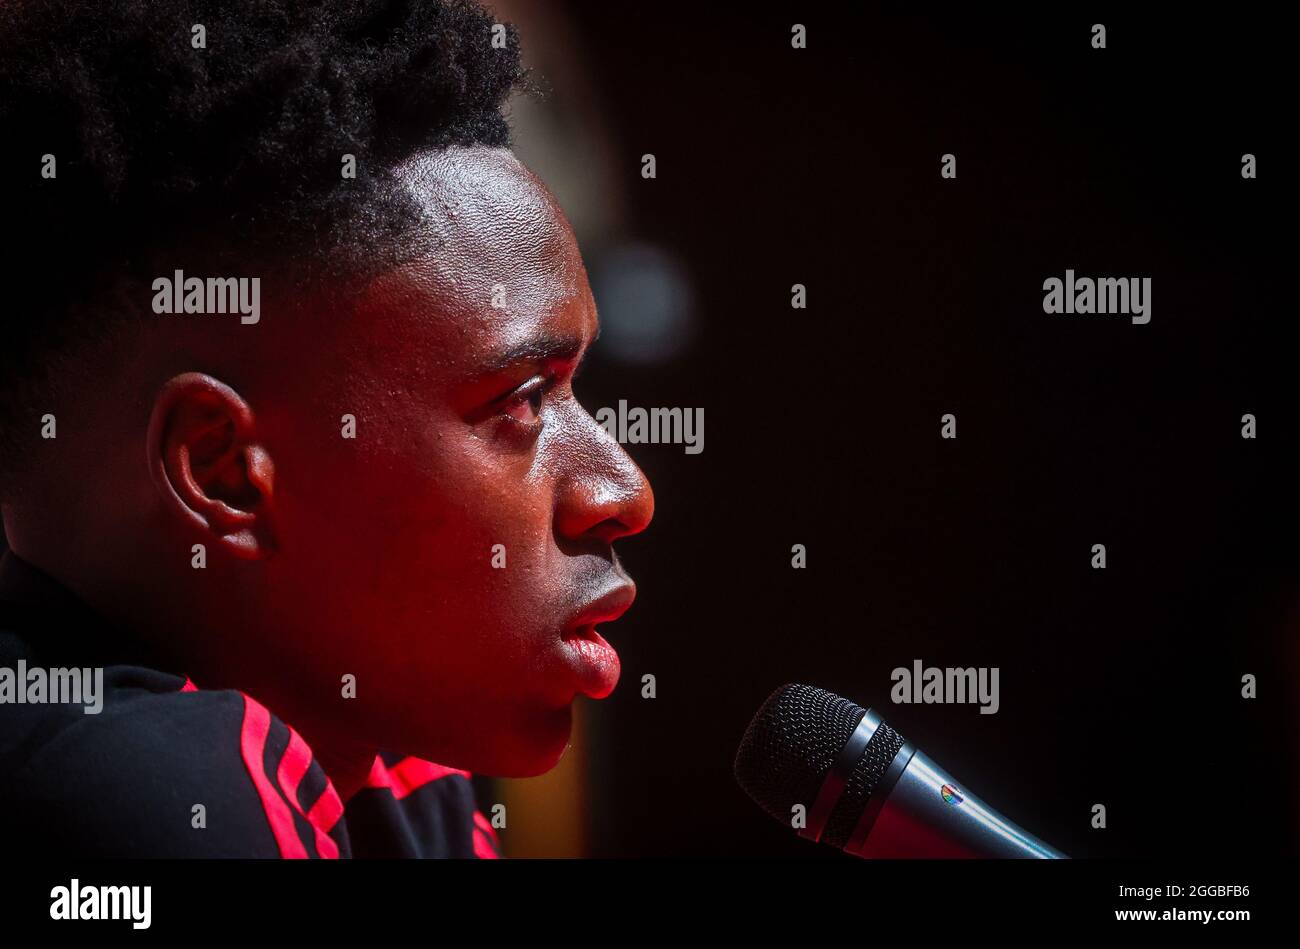 Belgium's Albert Sambi Lokonga pictured during a press moment of Belgian national soccer team Red Devils to prepare three qualification games for the Stock Photo